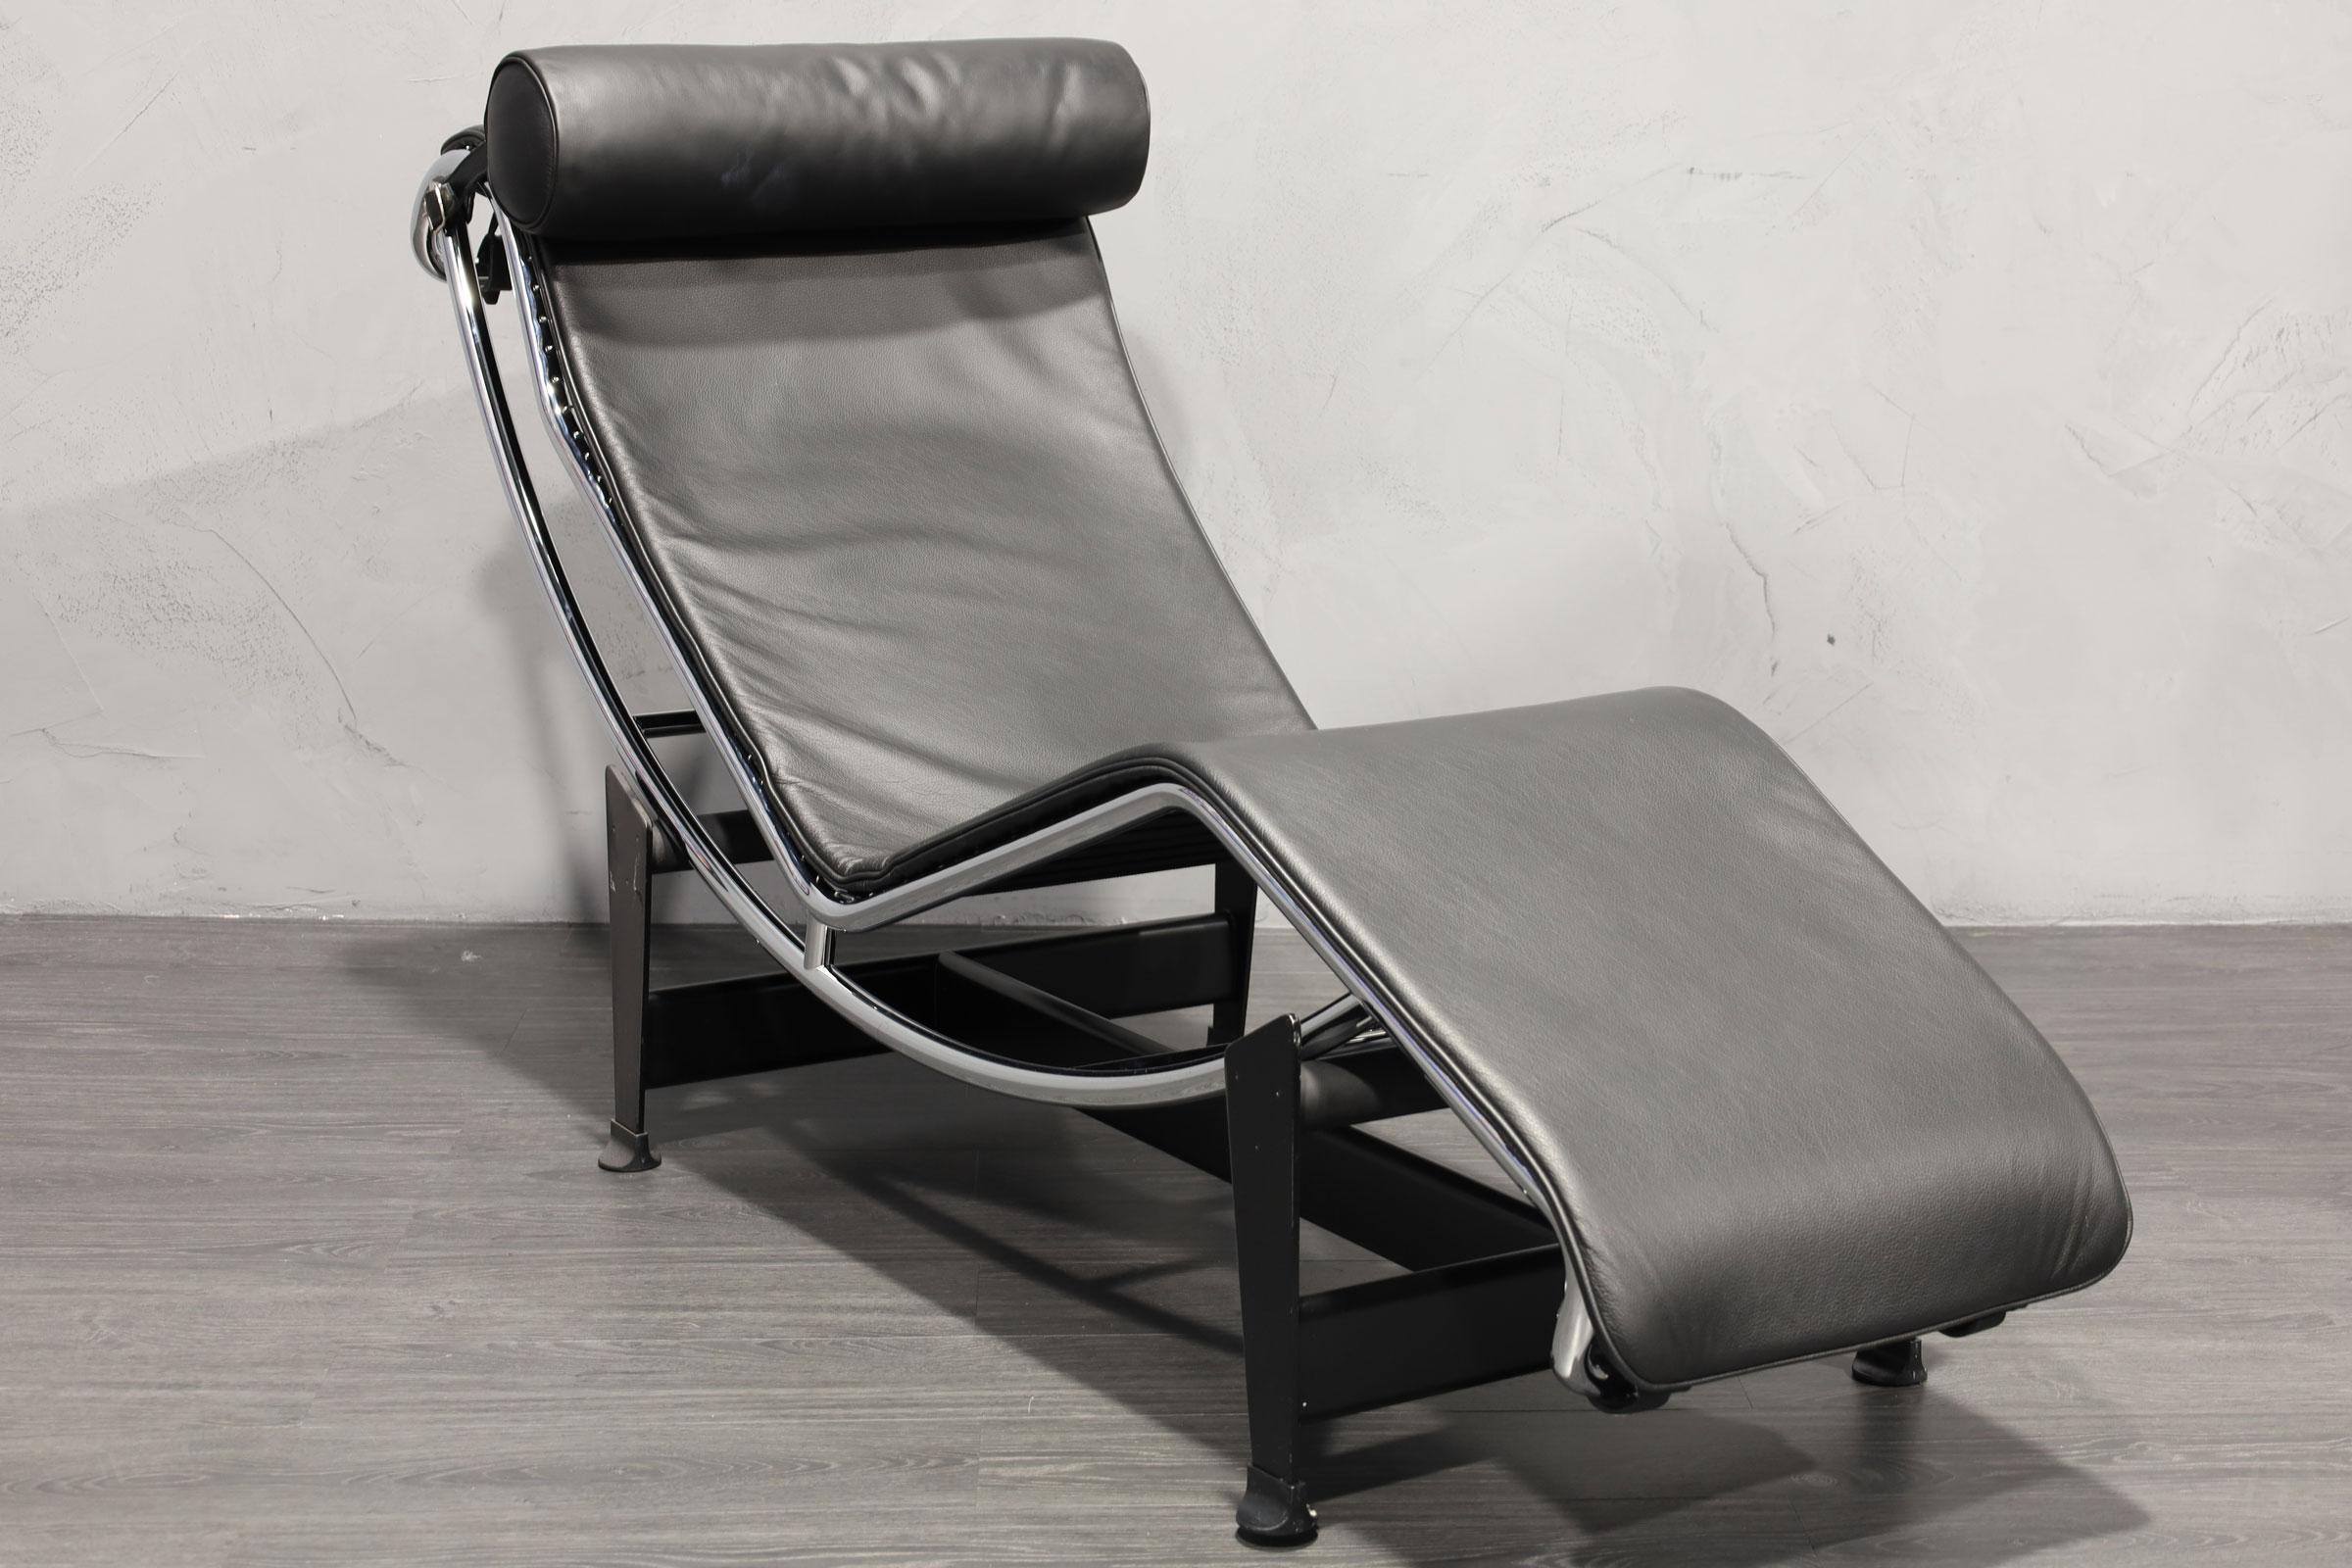 Le Corbusier held that furniture should be “extensions of our limbs and adapted to human functions.” The LC4 Chaise Longue (1928) embodies this notion with a “floating” frame that moves with the body. The LC4 is included in the permanent collection